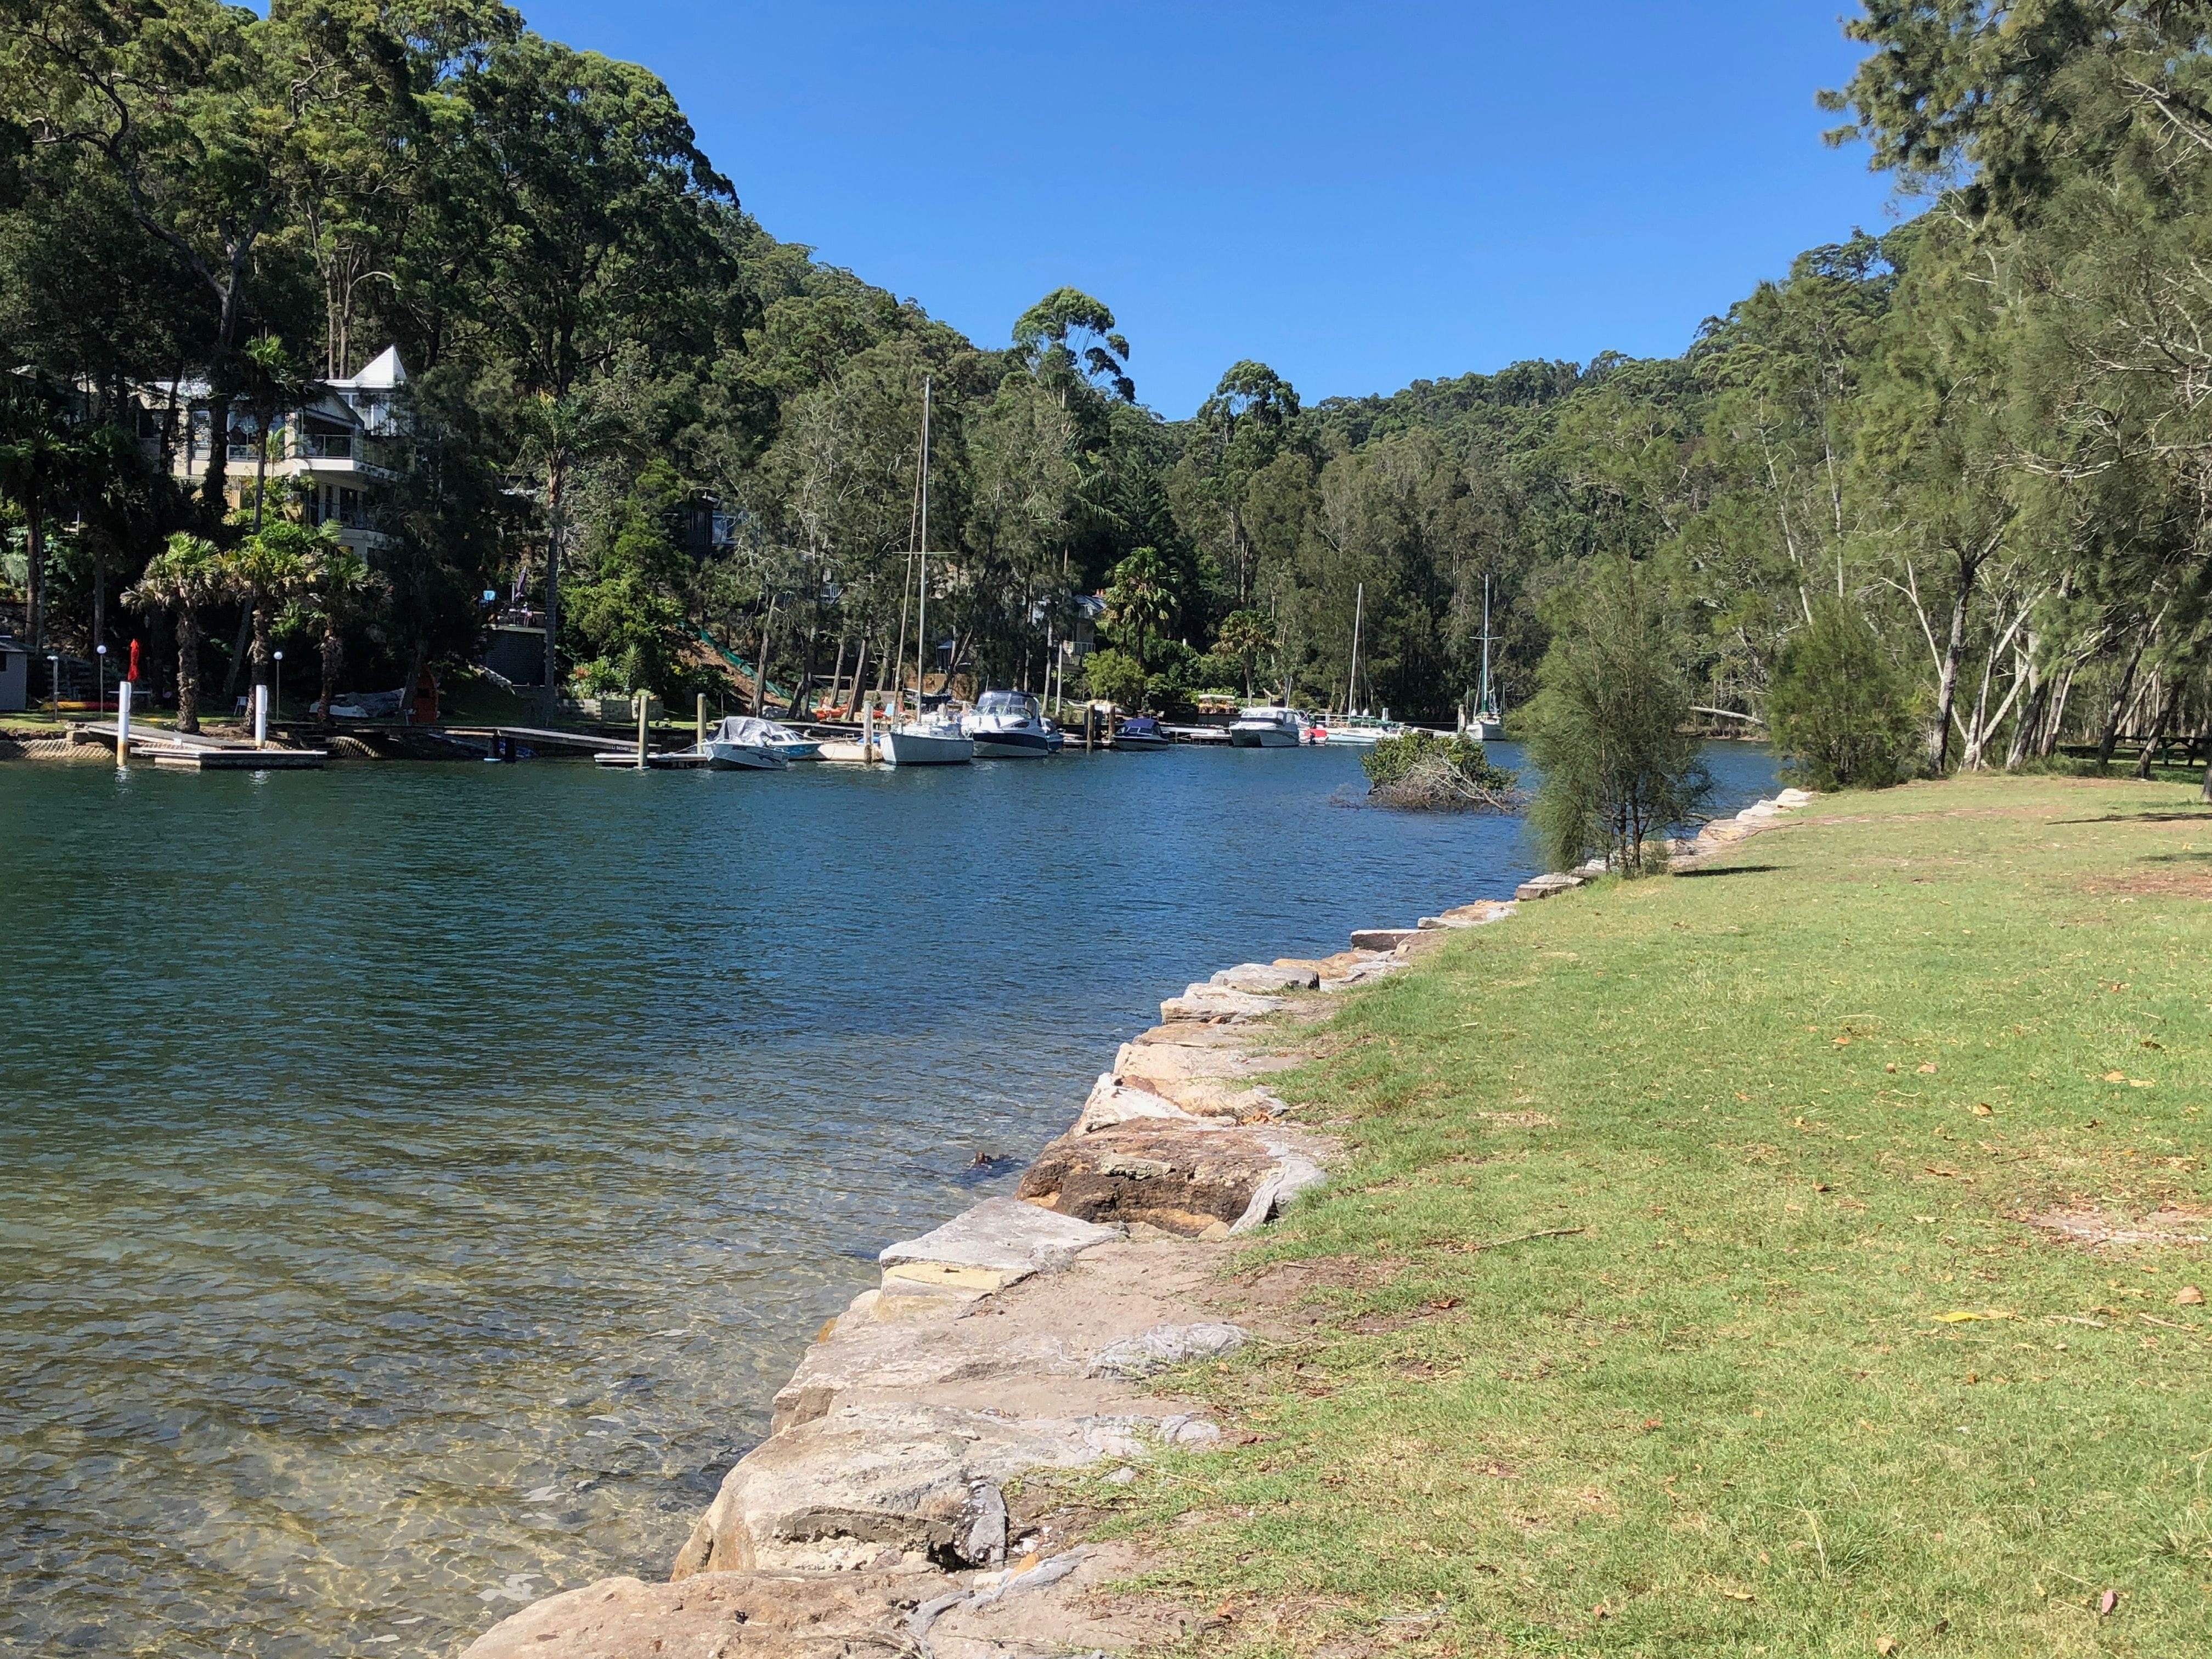 Northern Beaches Public Day Tour febuary 2019 Image -5c649617616db